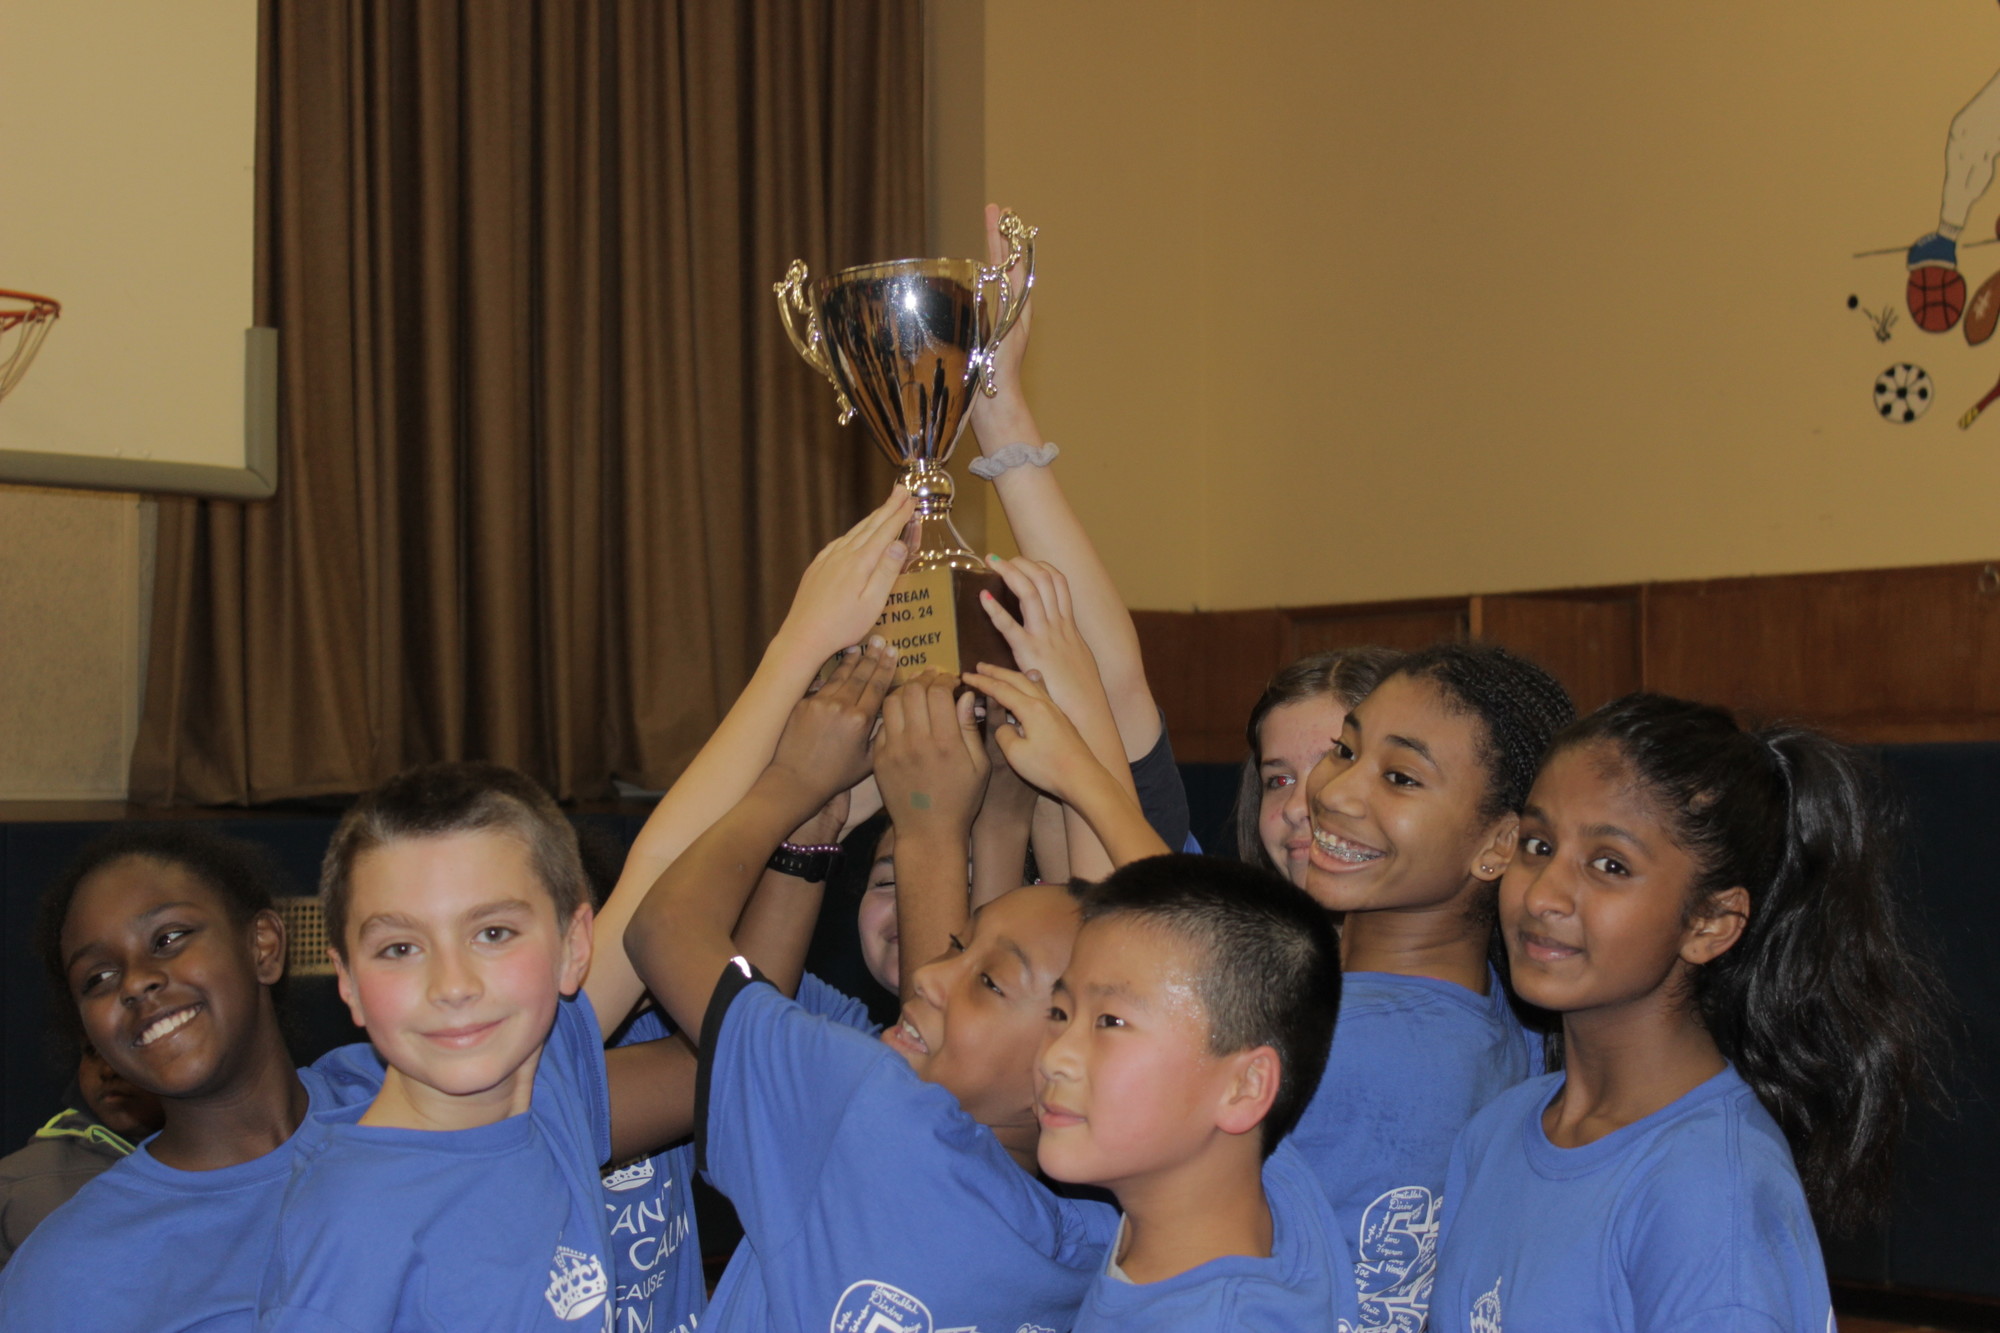 Players on Brooklyn Avenue Team No. 1 celebrated their win by holding up the victory cup.